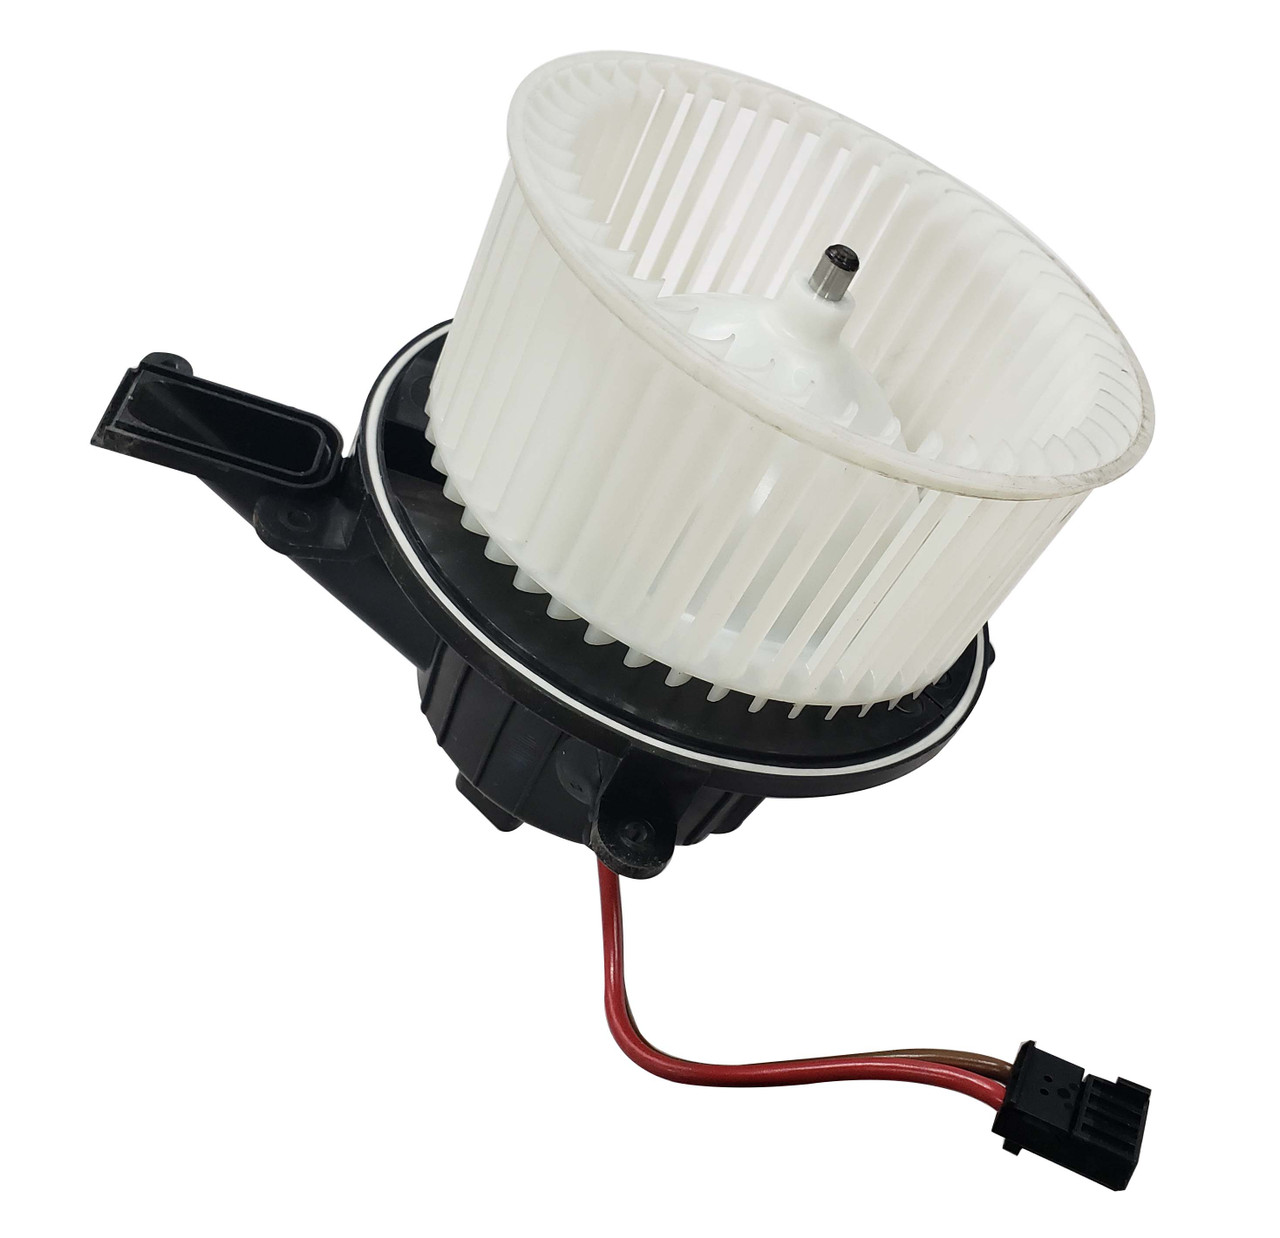 Blower, Mechanical Radial, 20 Metris. Replacement For No. A0008300102